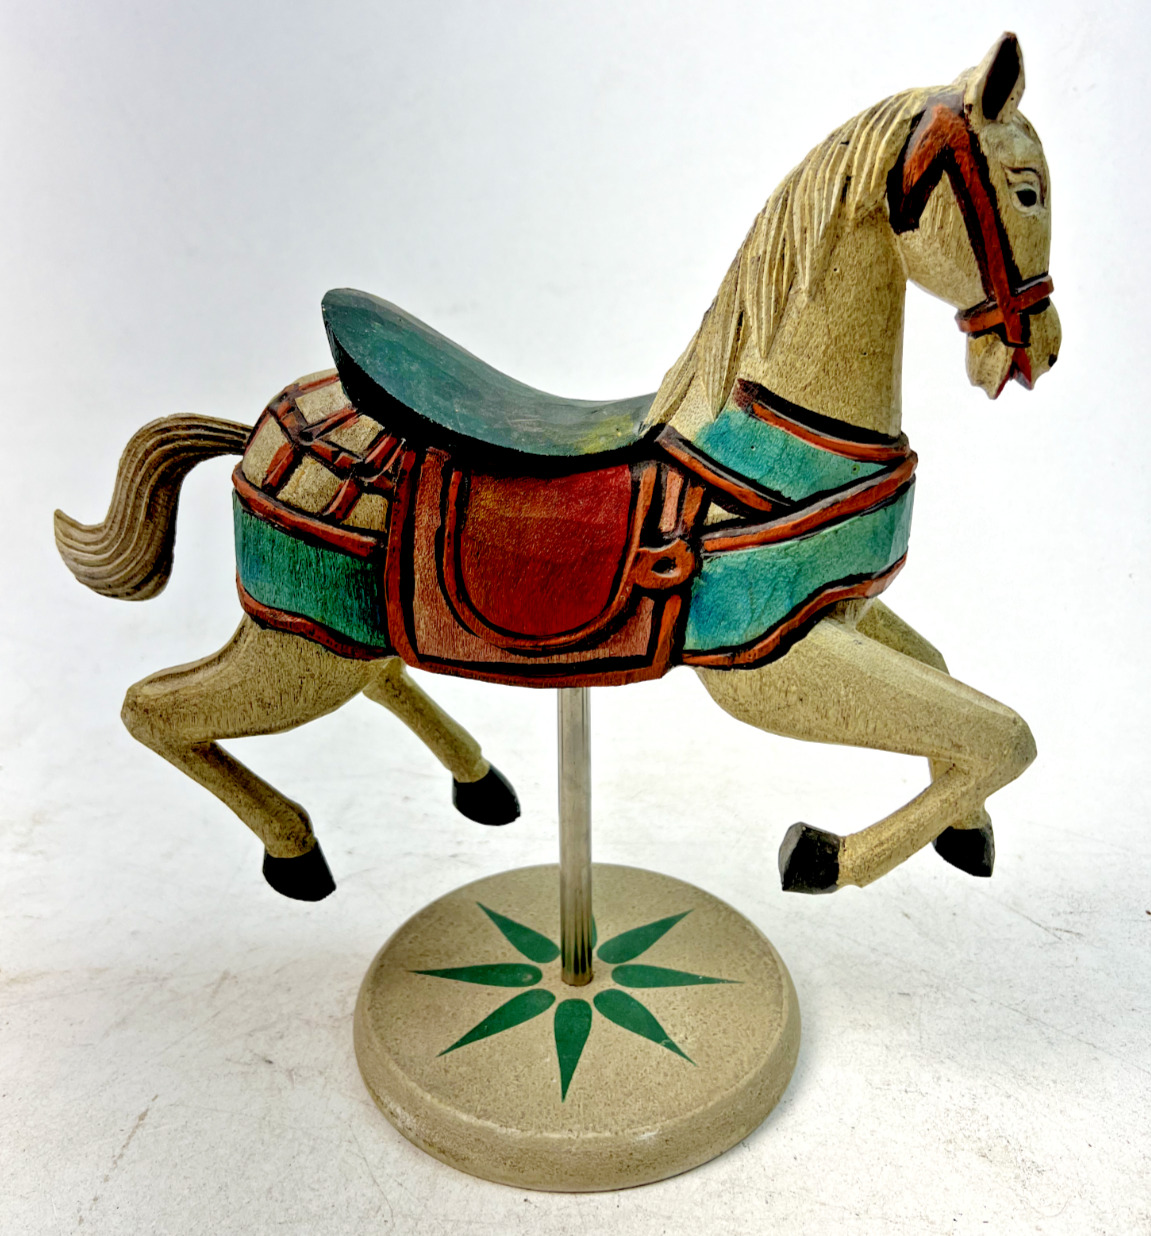 Antique Hand-Painted Wooden Table Top Carousel Horse